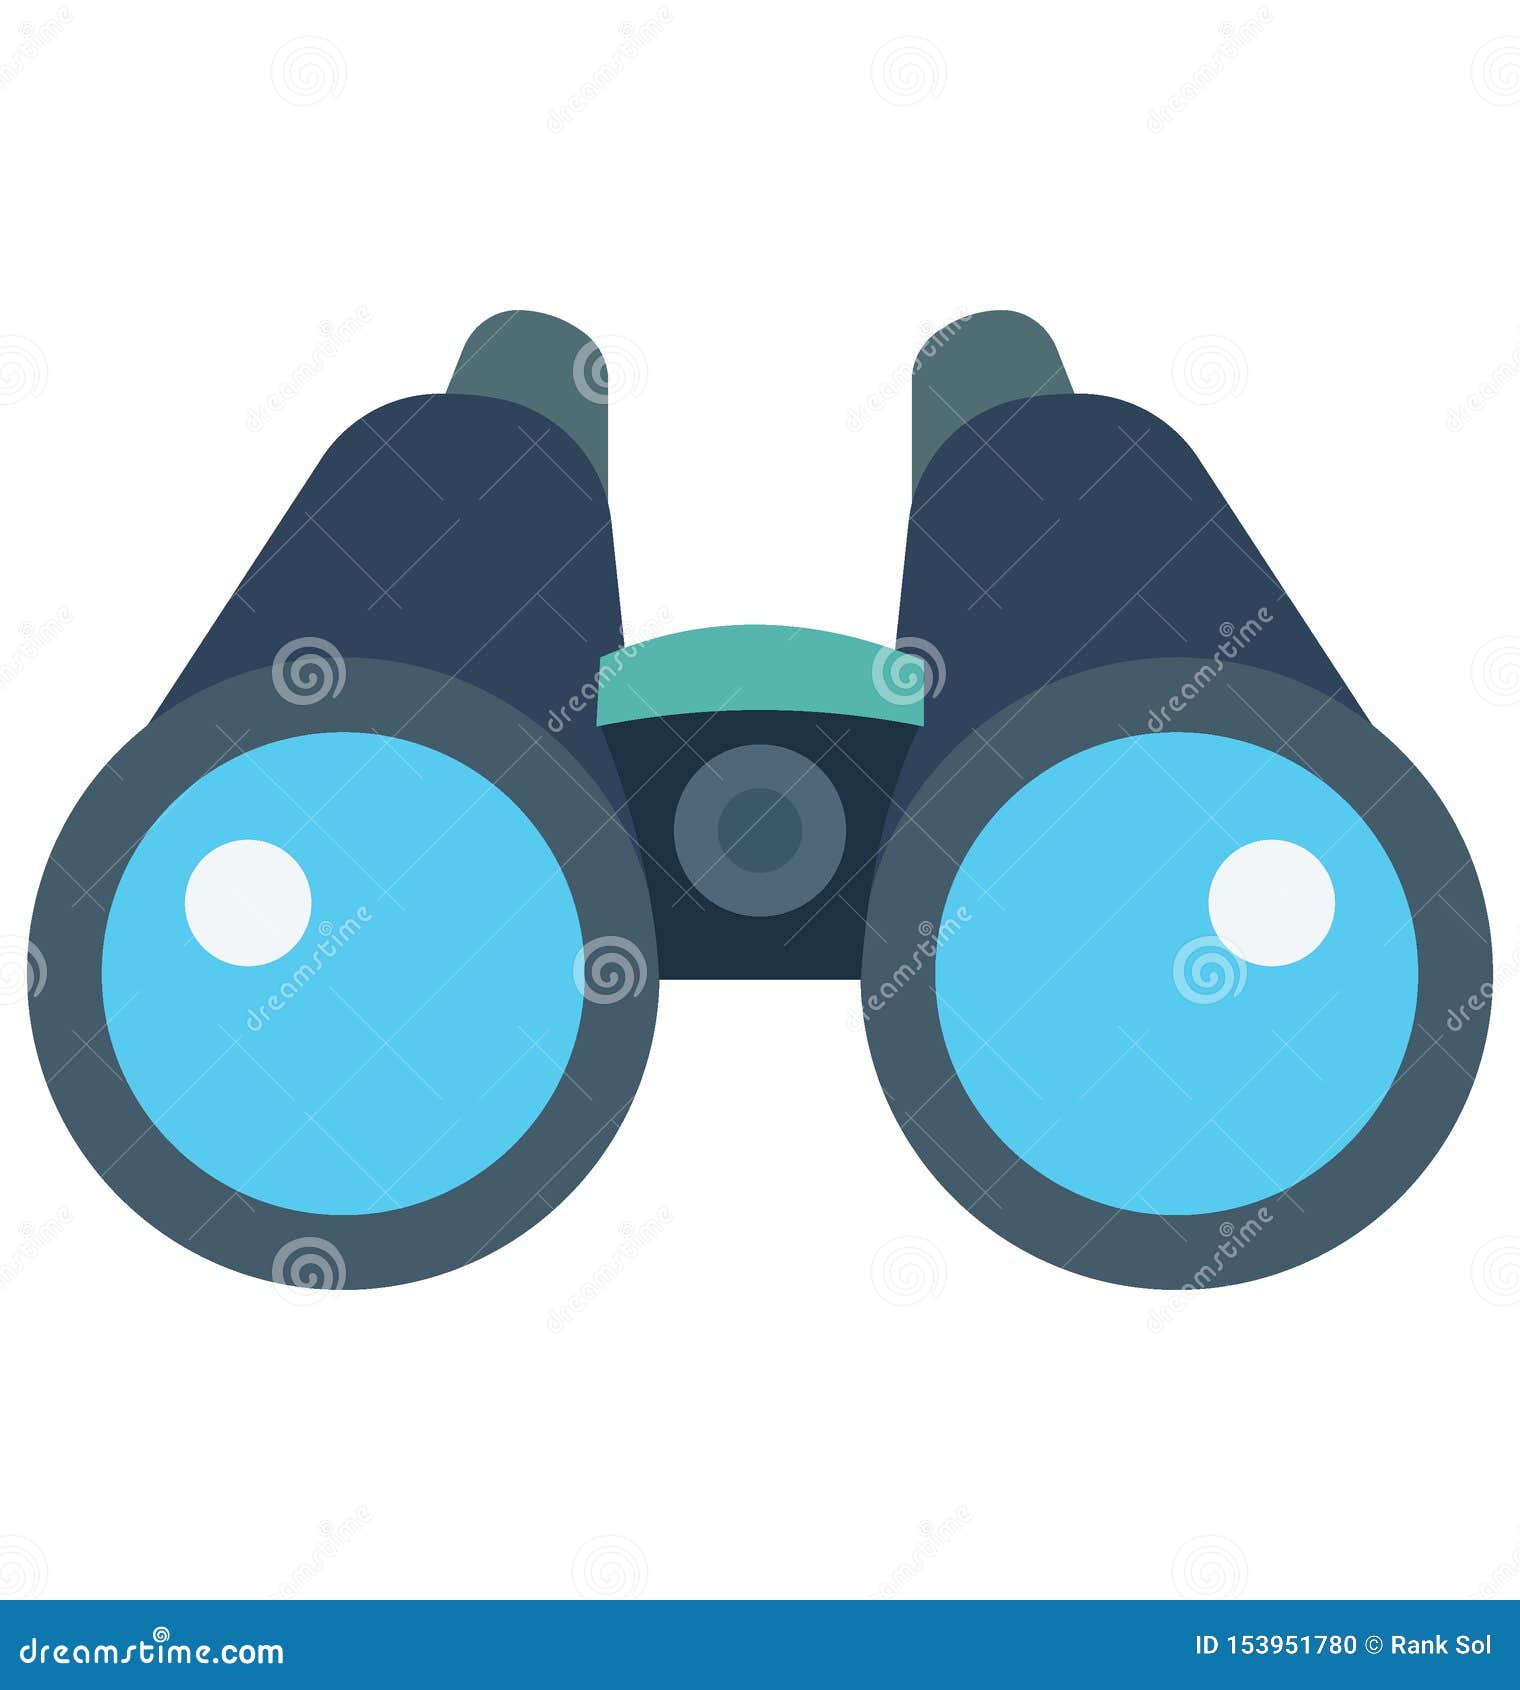 binoculars color  icon which can easily modify or edit